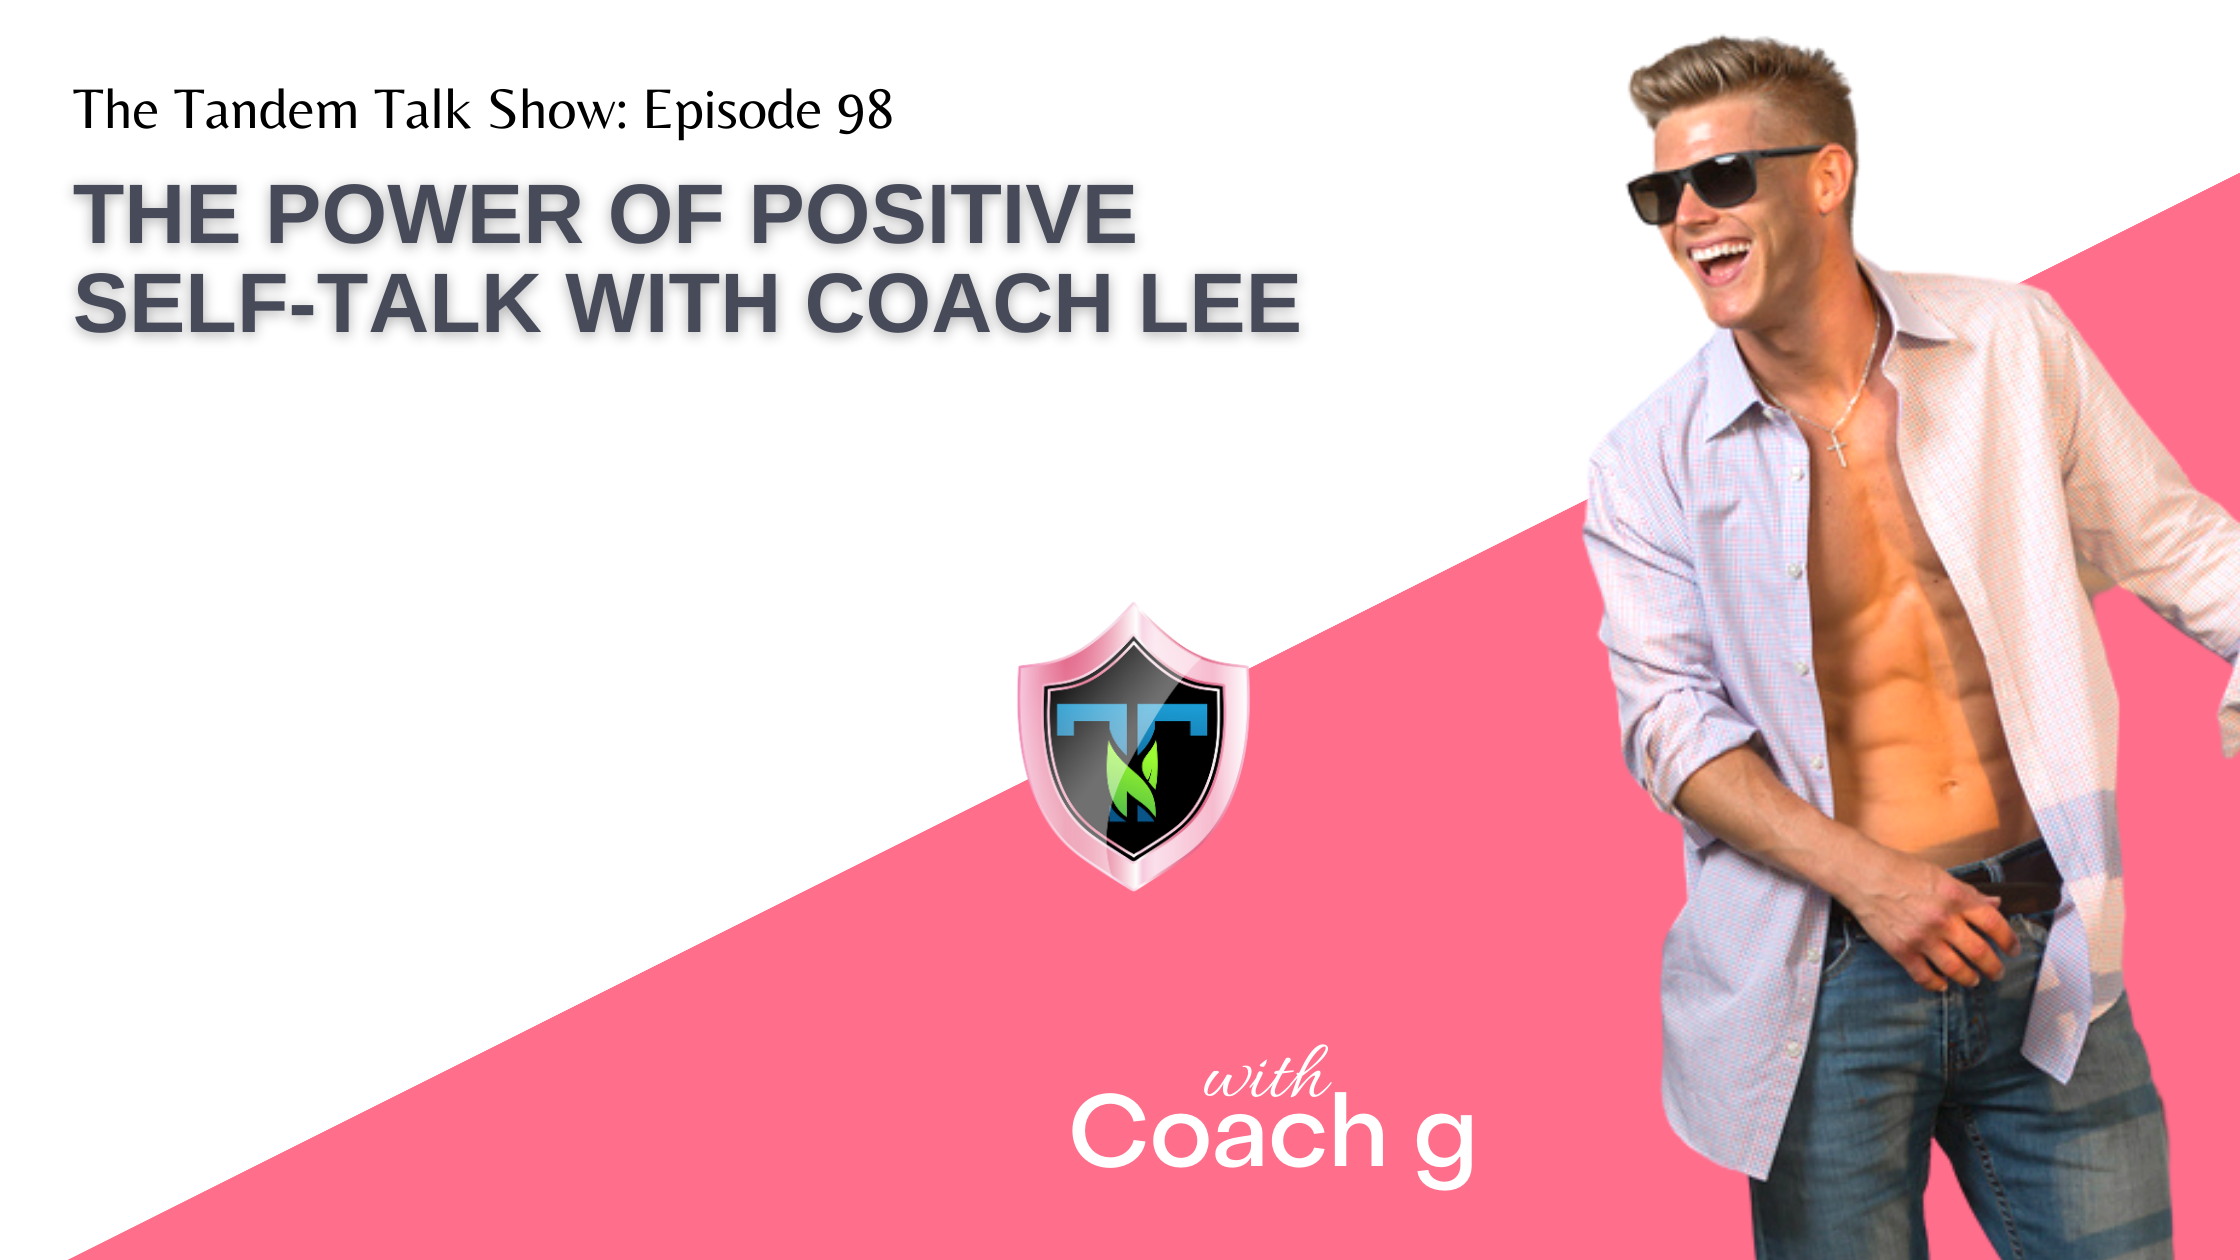 The Power of Positive Self-Talk with Coach Lee